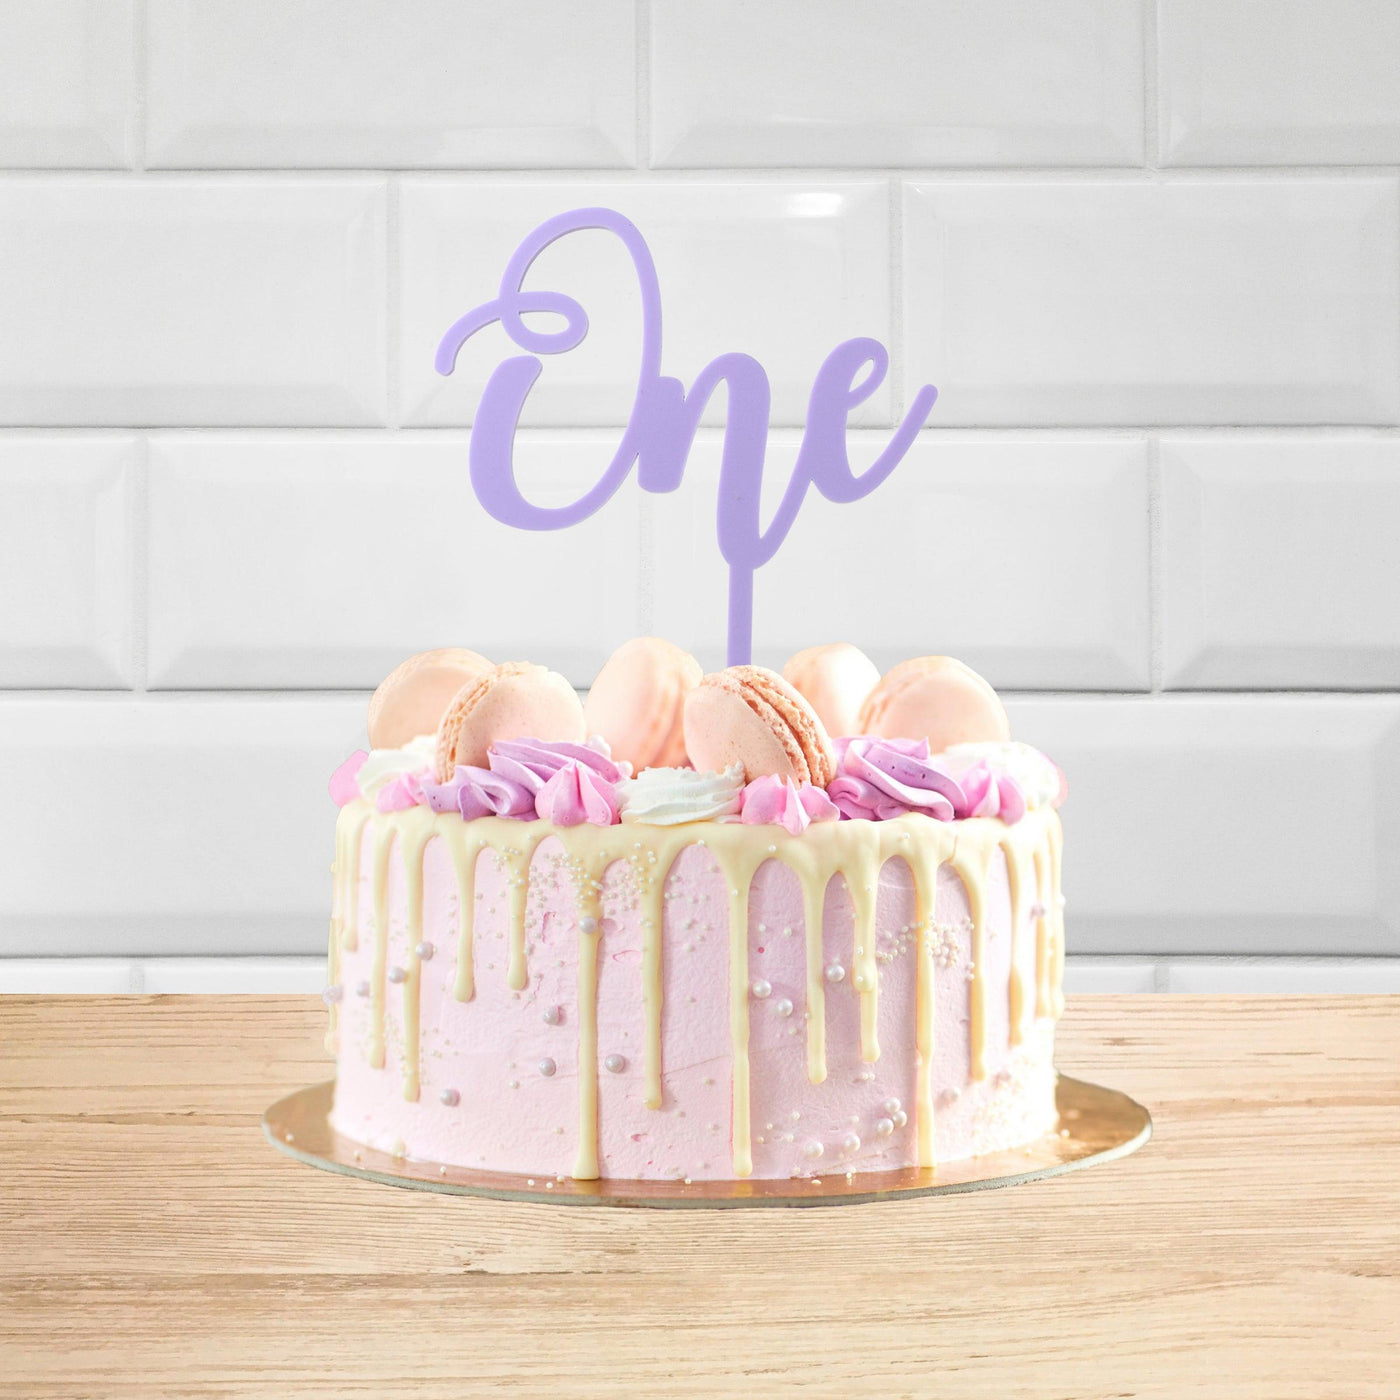 'One' Cake Topper - Wood or Acrylic